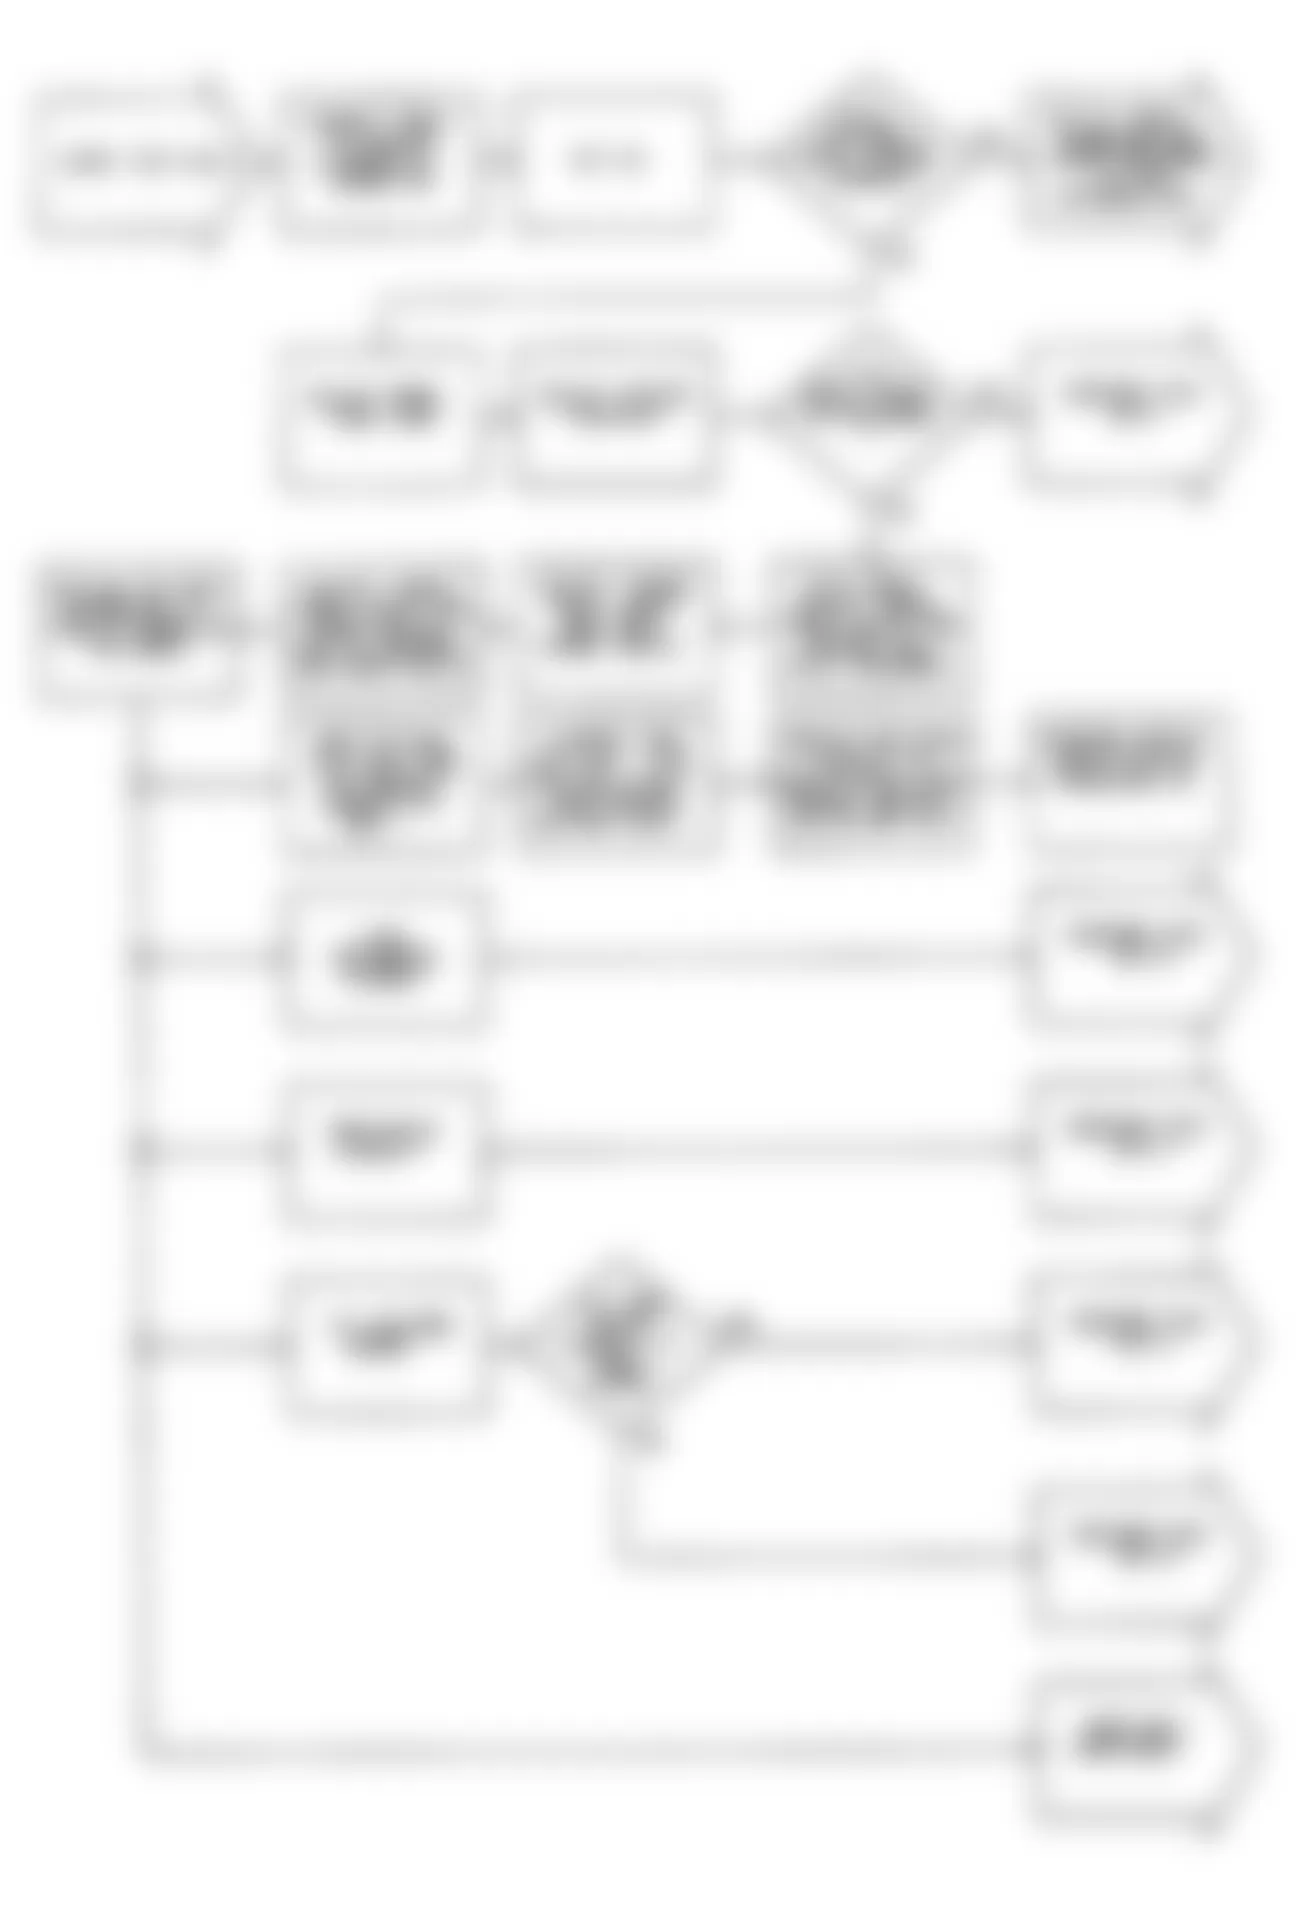 Chrysler LeBaron 1990 - Component Locations -  NS-2: Flow Chart (1 of 2)